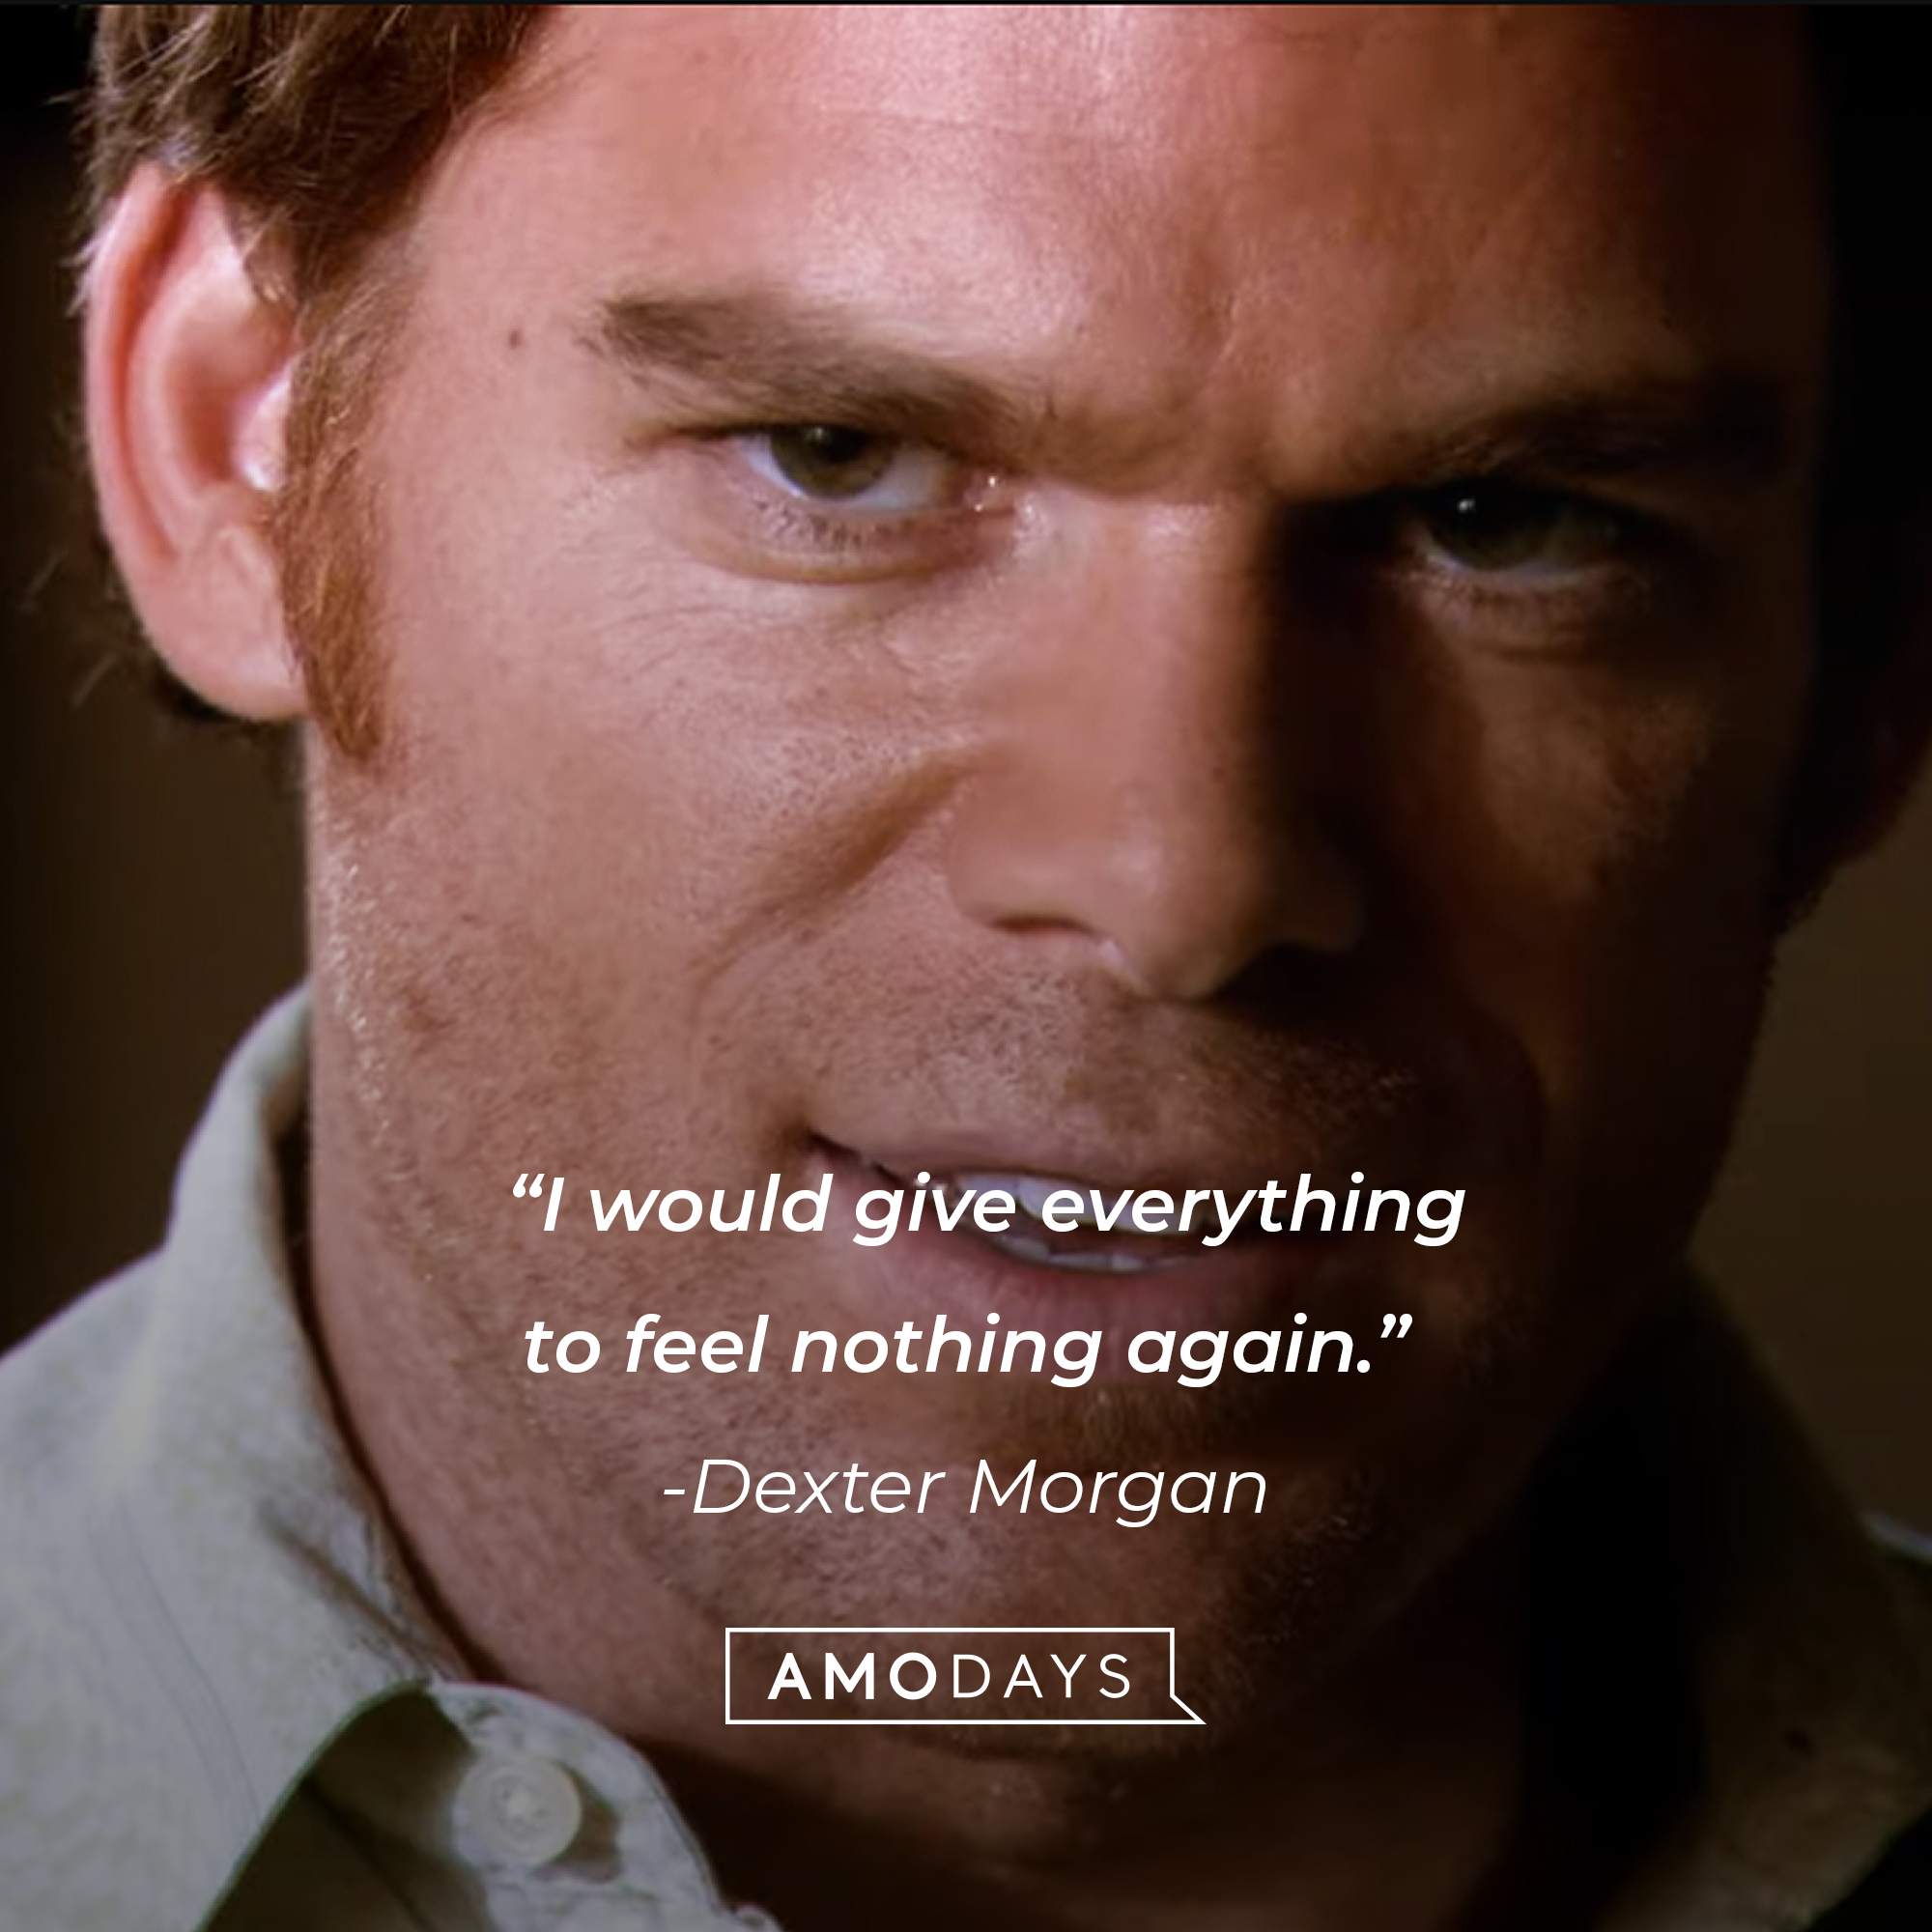 Dexter Morgan, with his quote: “I would give everything to feel nothing again.” | Source: Showtime